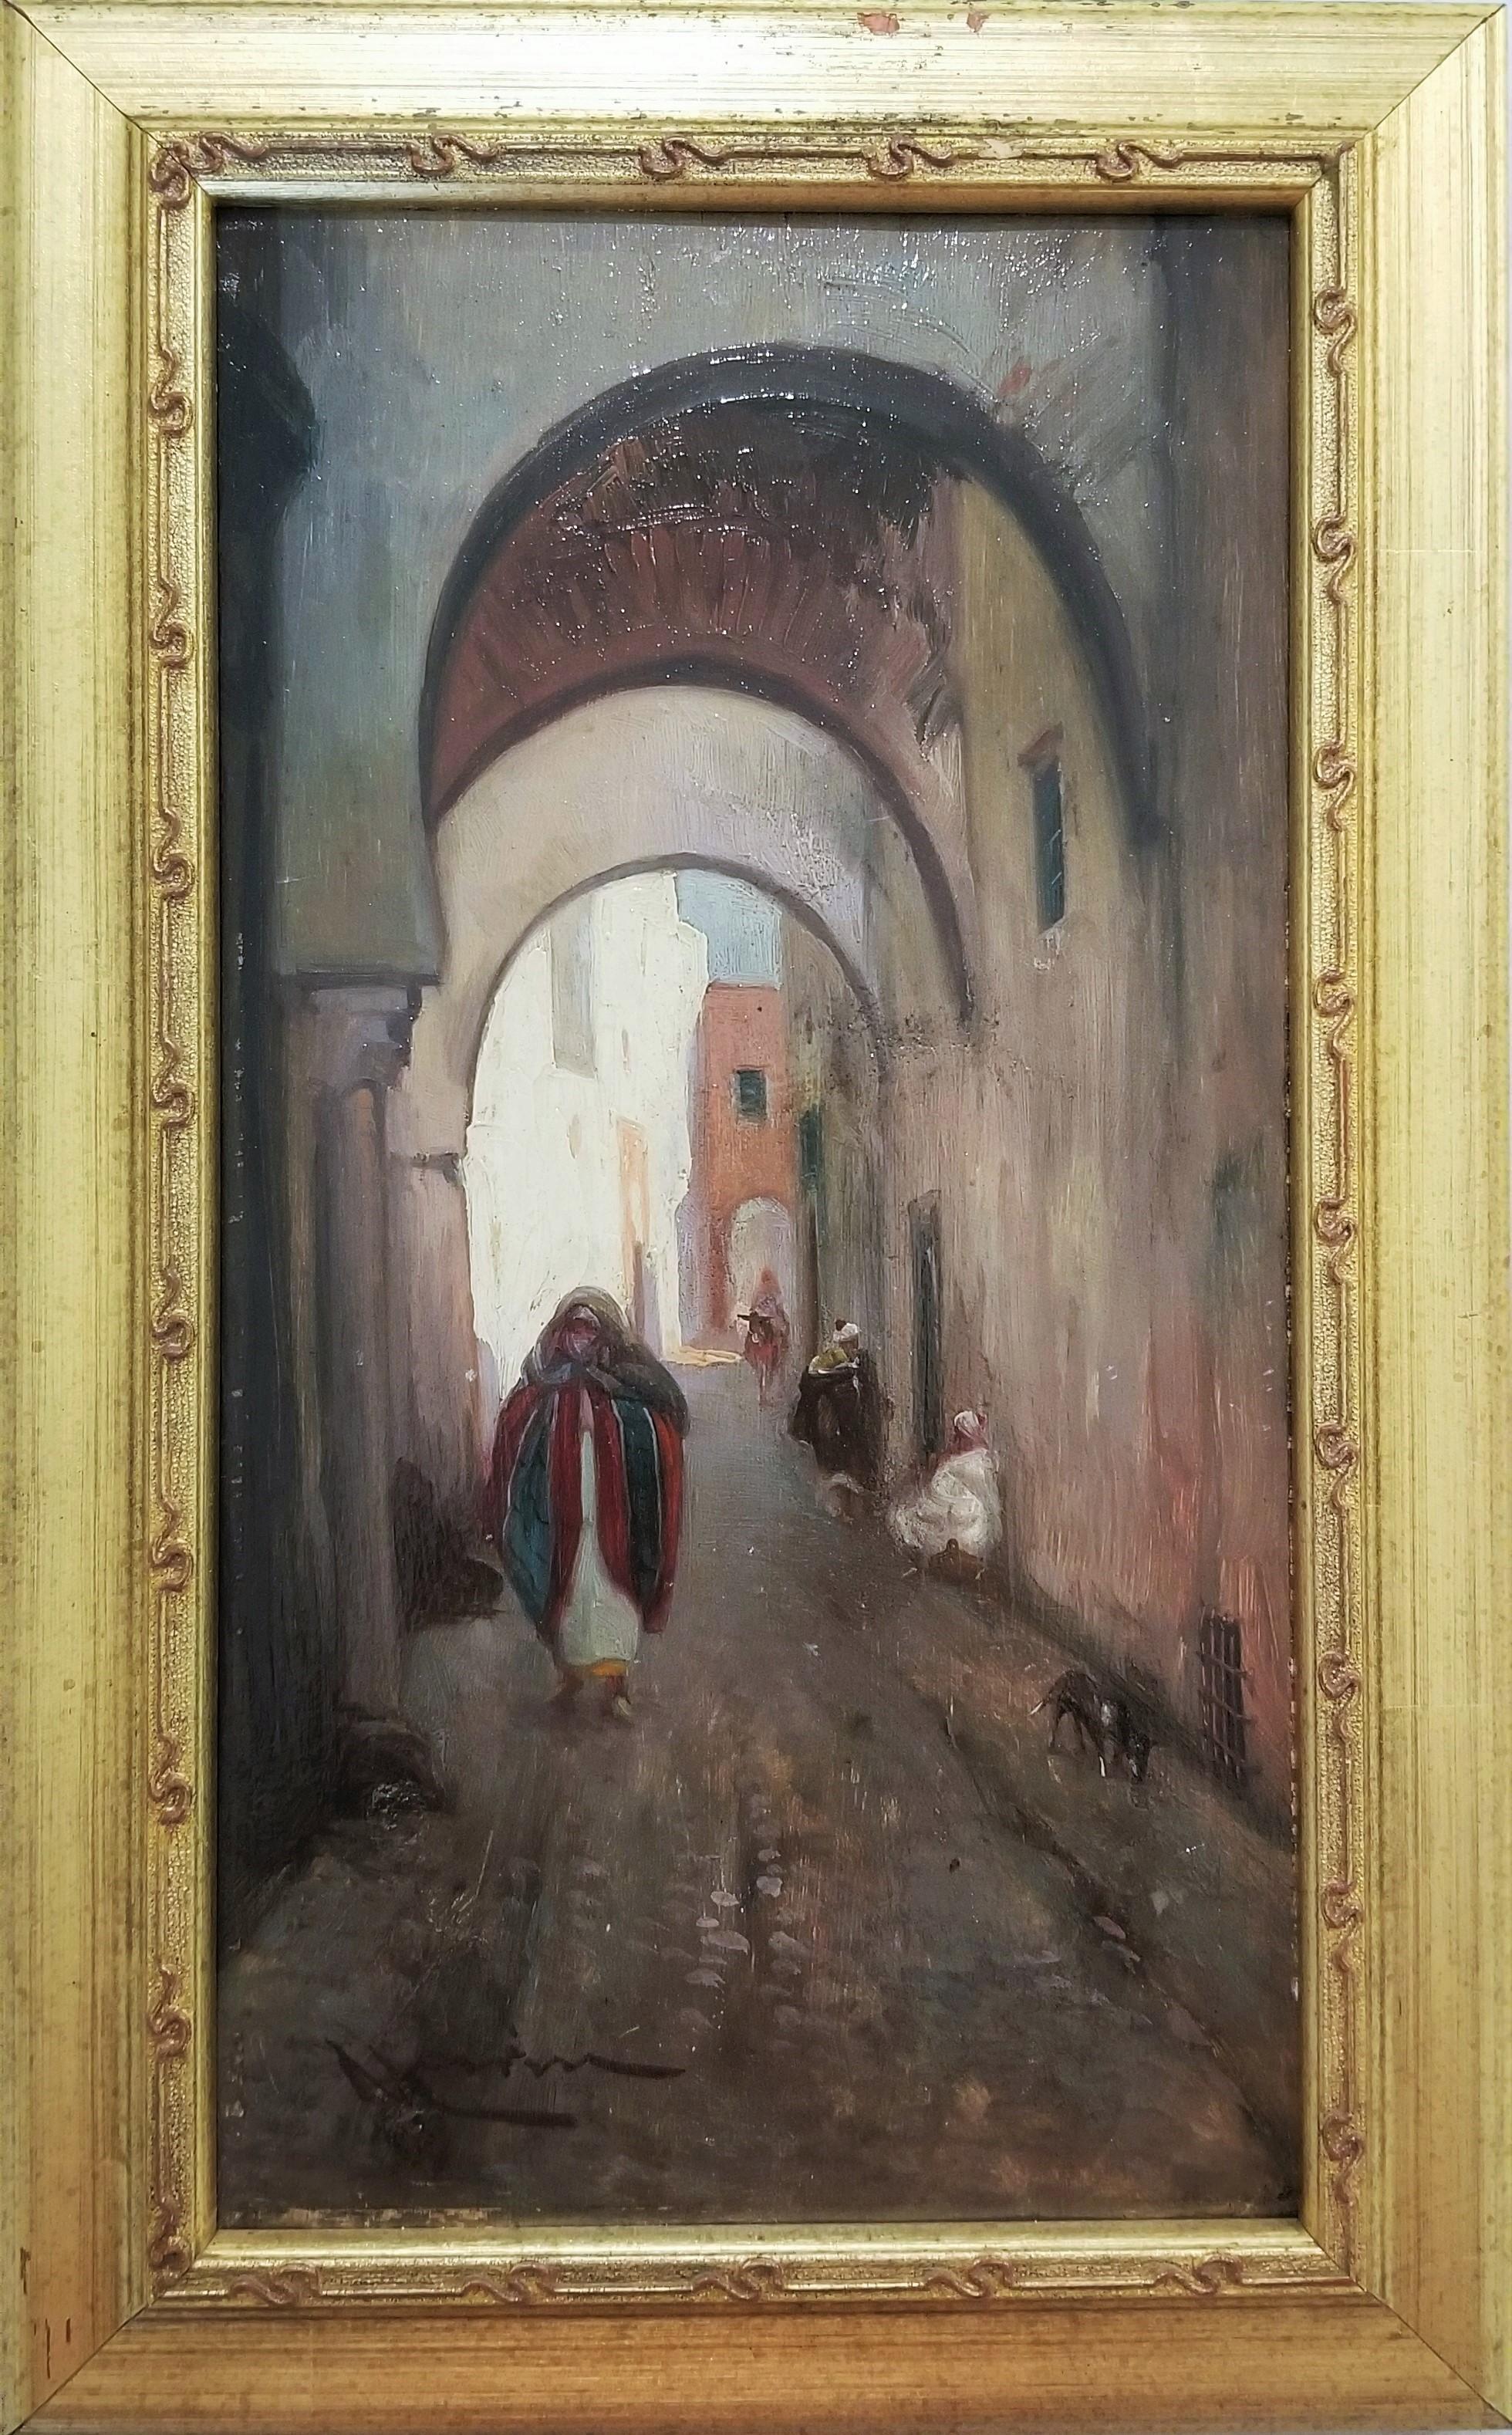 City Street Scene, Damascus, Syria /// Orientalist Oil Painting Middle East - Gray Figurative Painting by Unknown